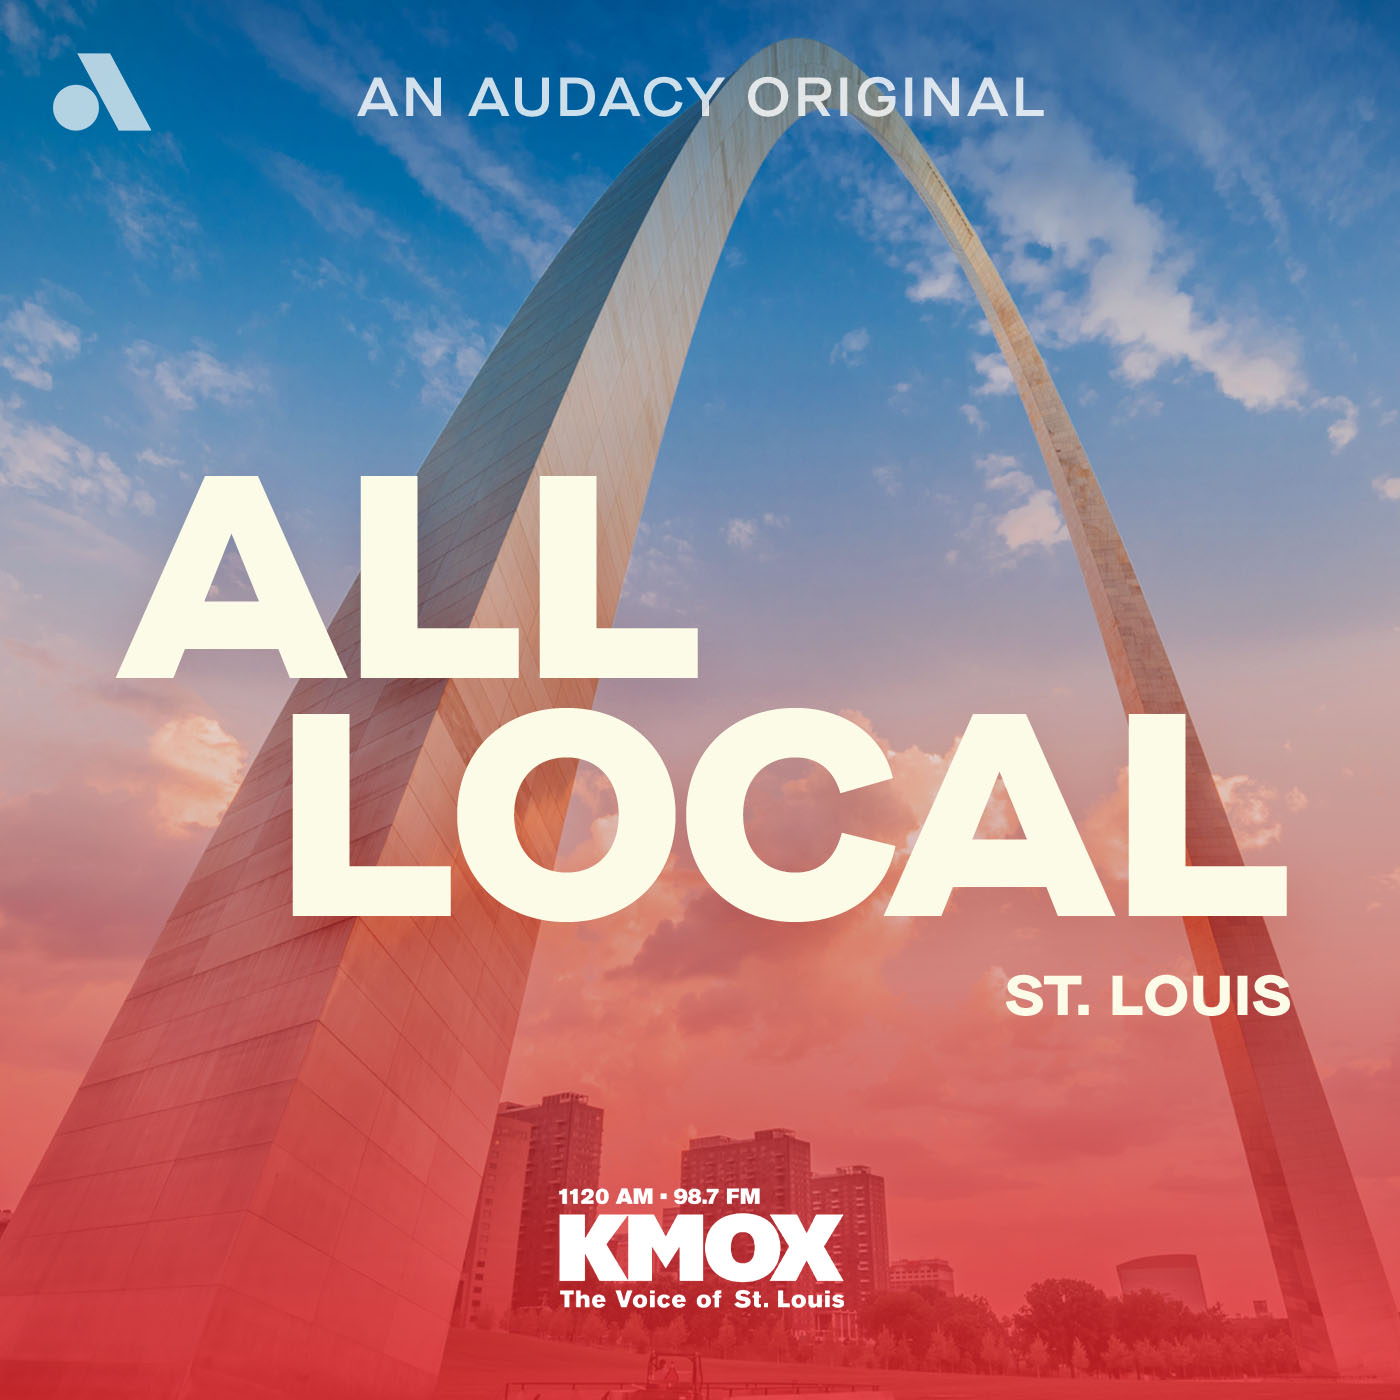 St. Louis All Local AM: St. Louis shops for red light cameras but are they legal?